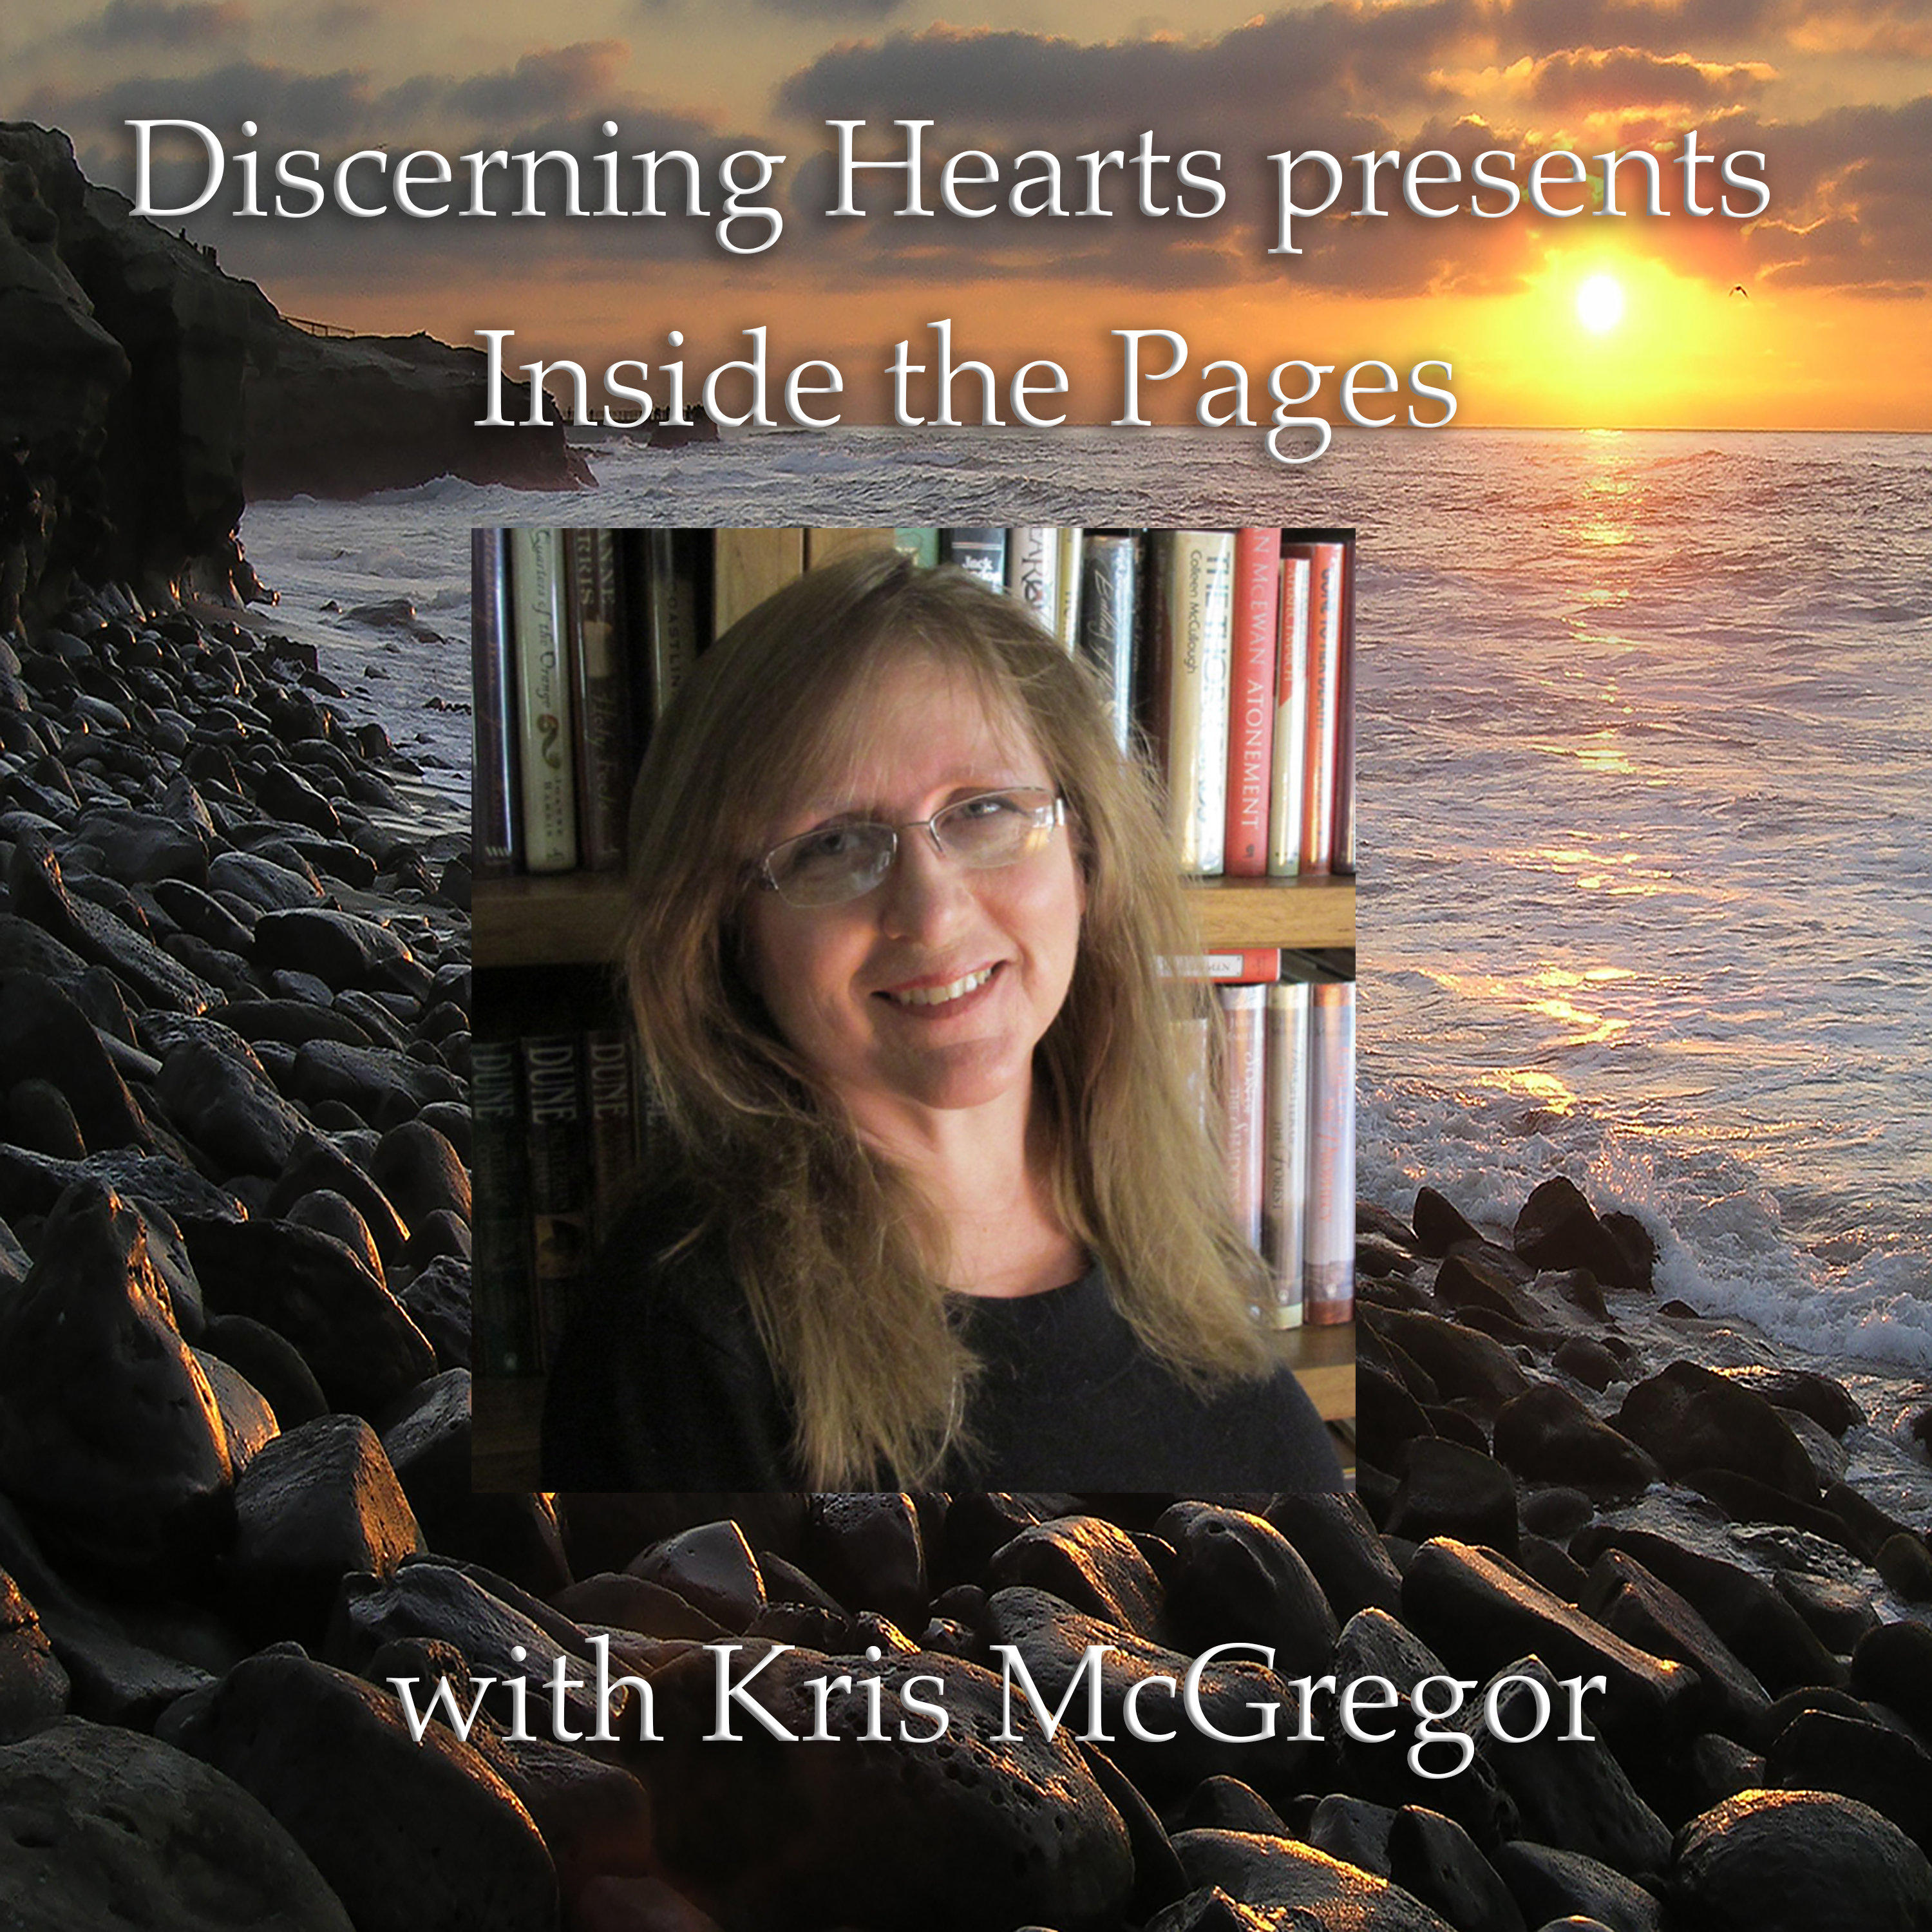 Discerning Hearts Catholic Podcasts » Inside the Pages with Kris McGregor